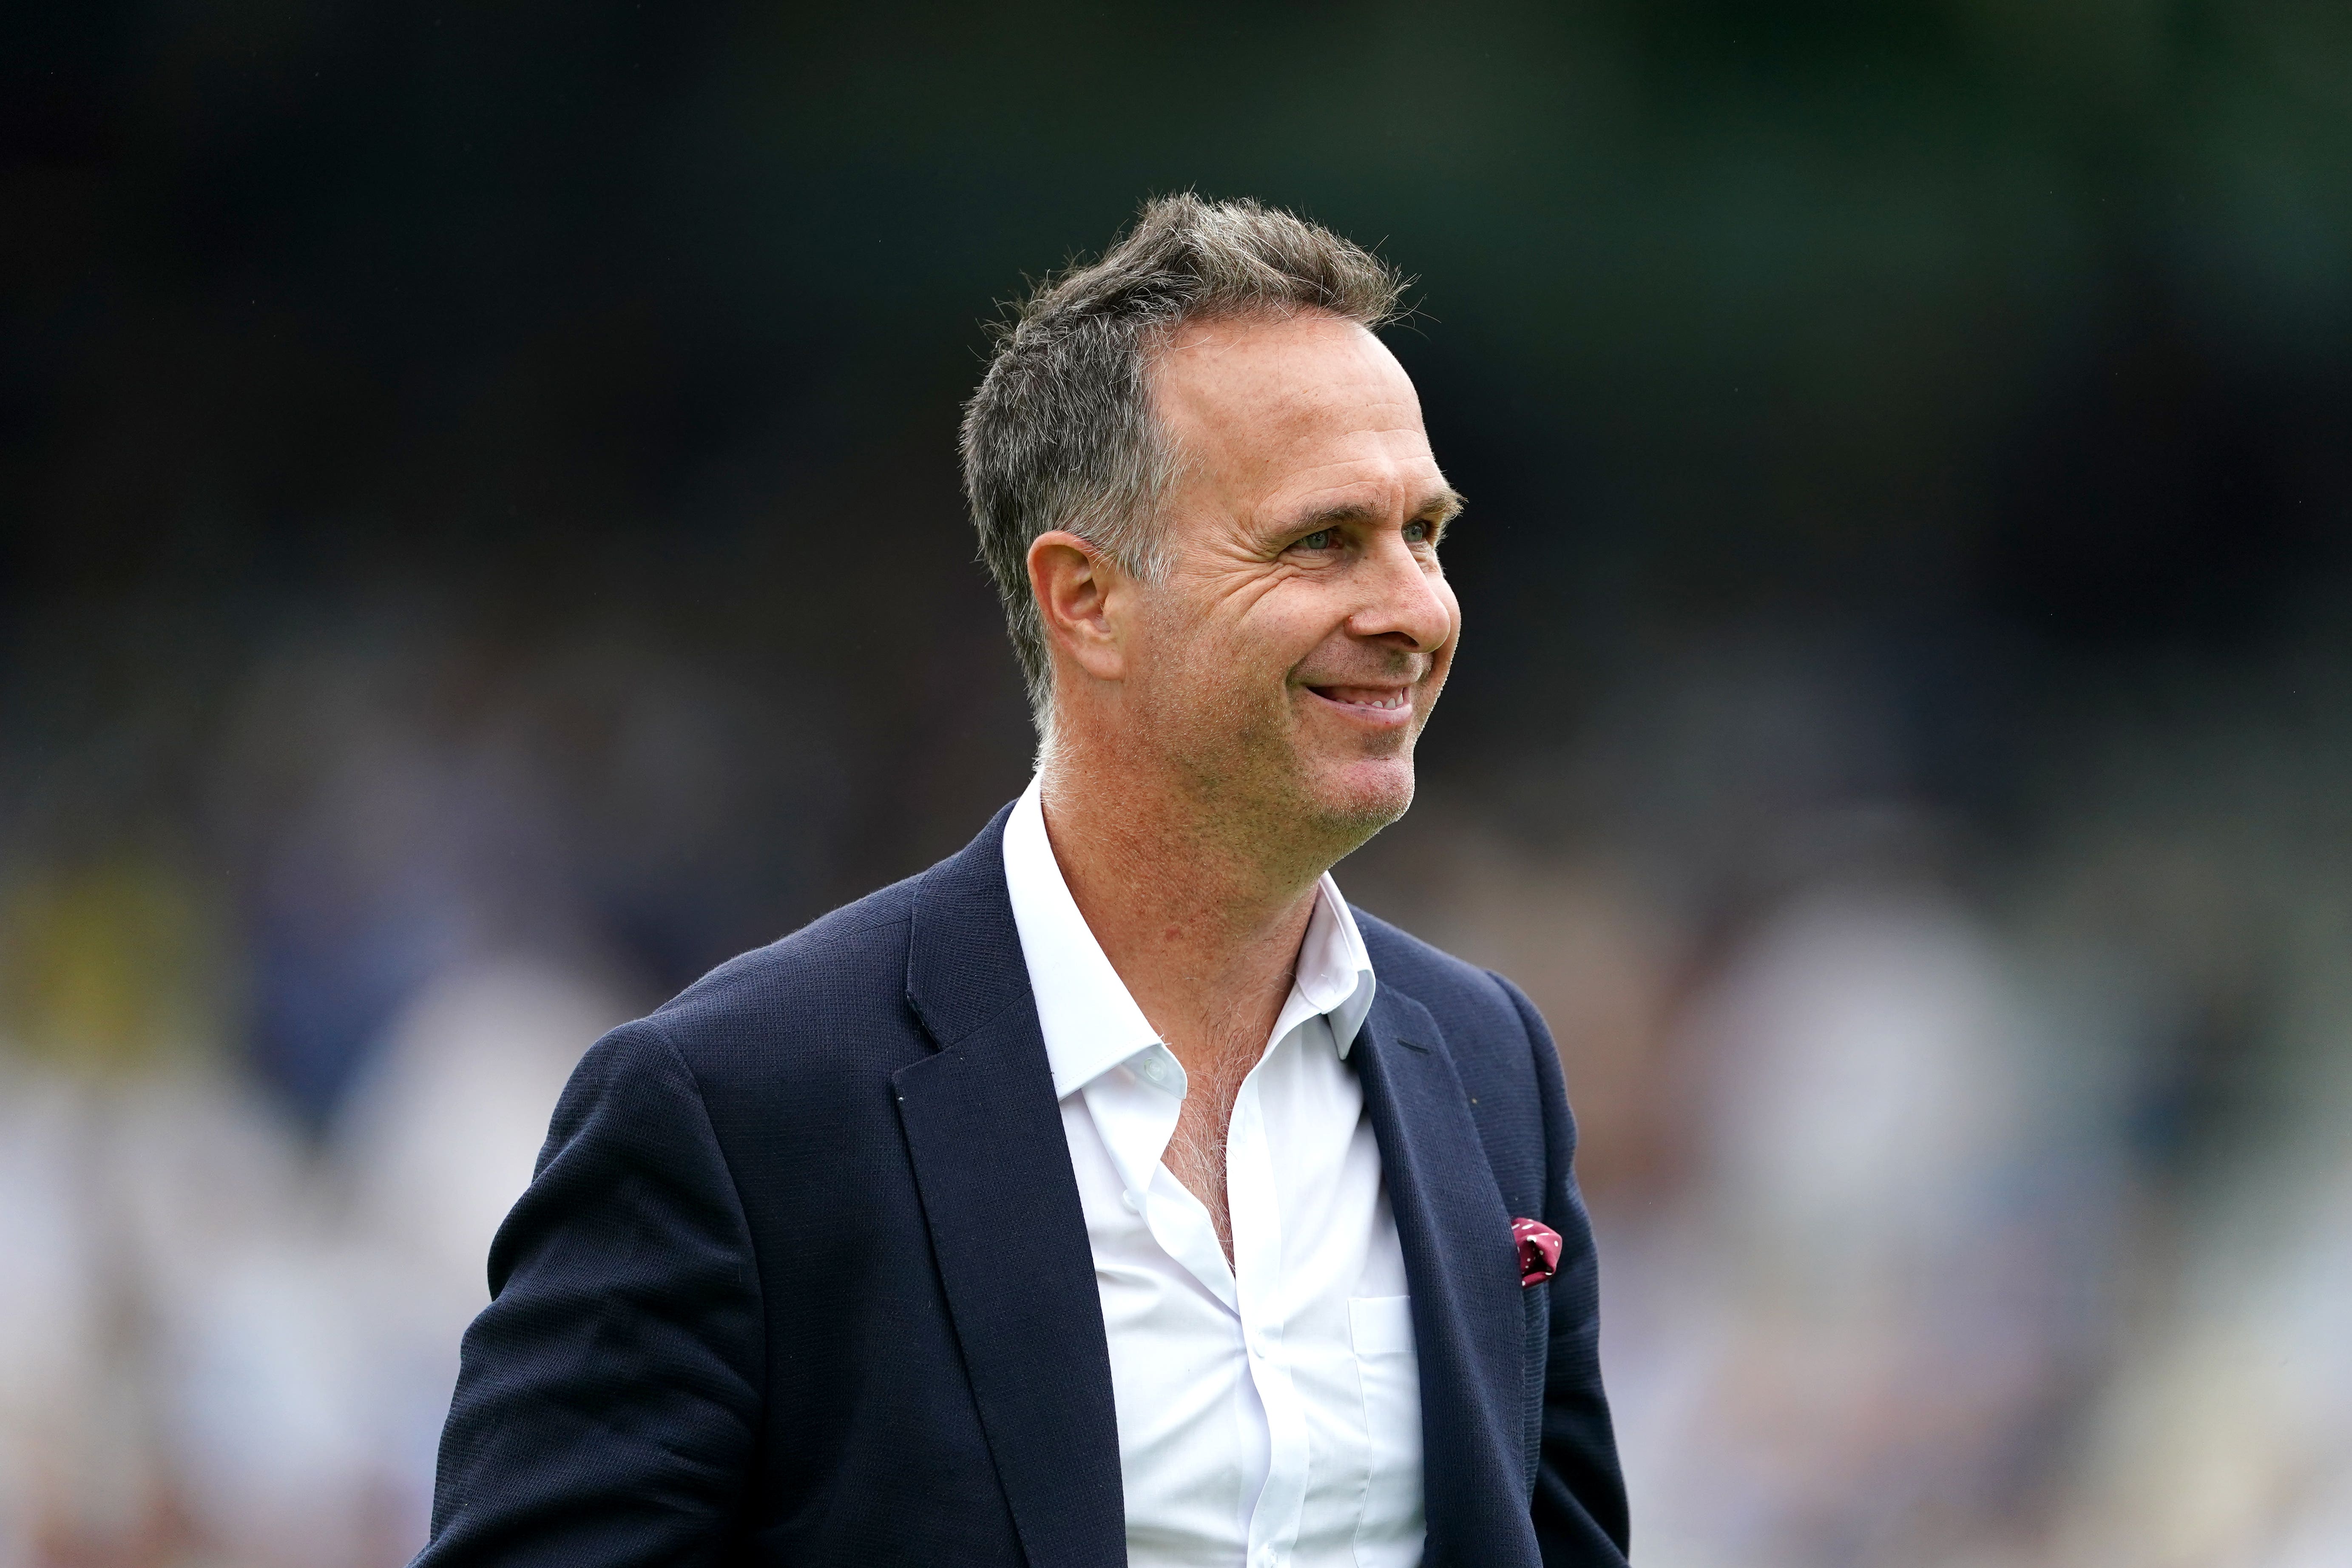 Michael Vaughan says England still have ‘huge amount to play for’ in